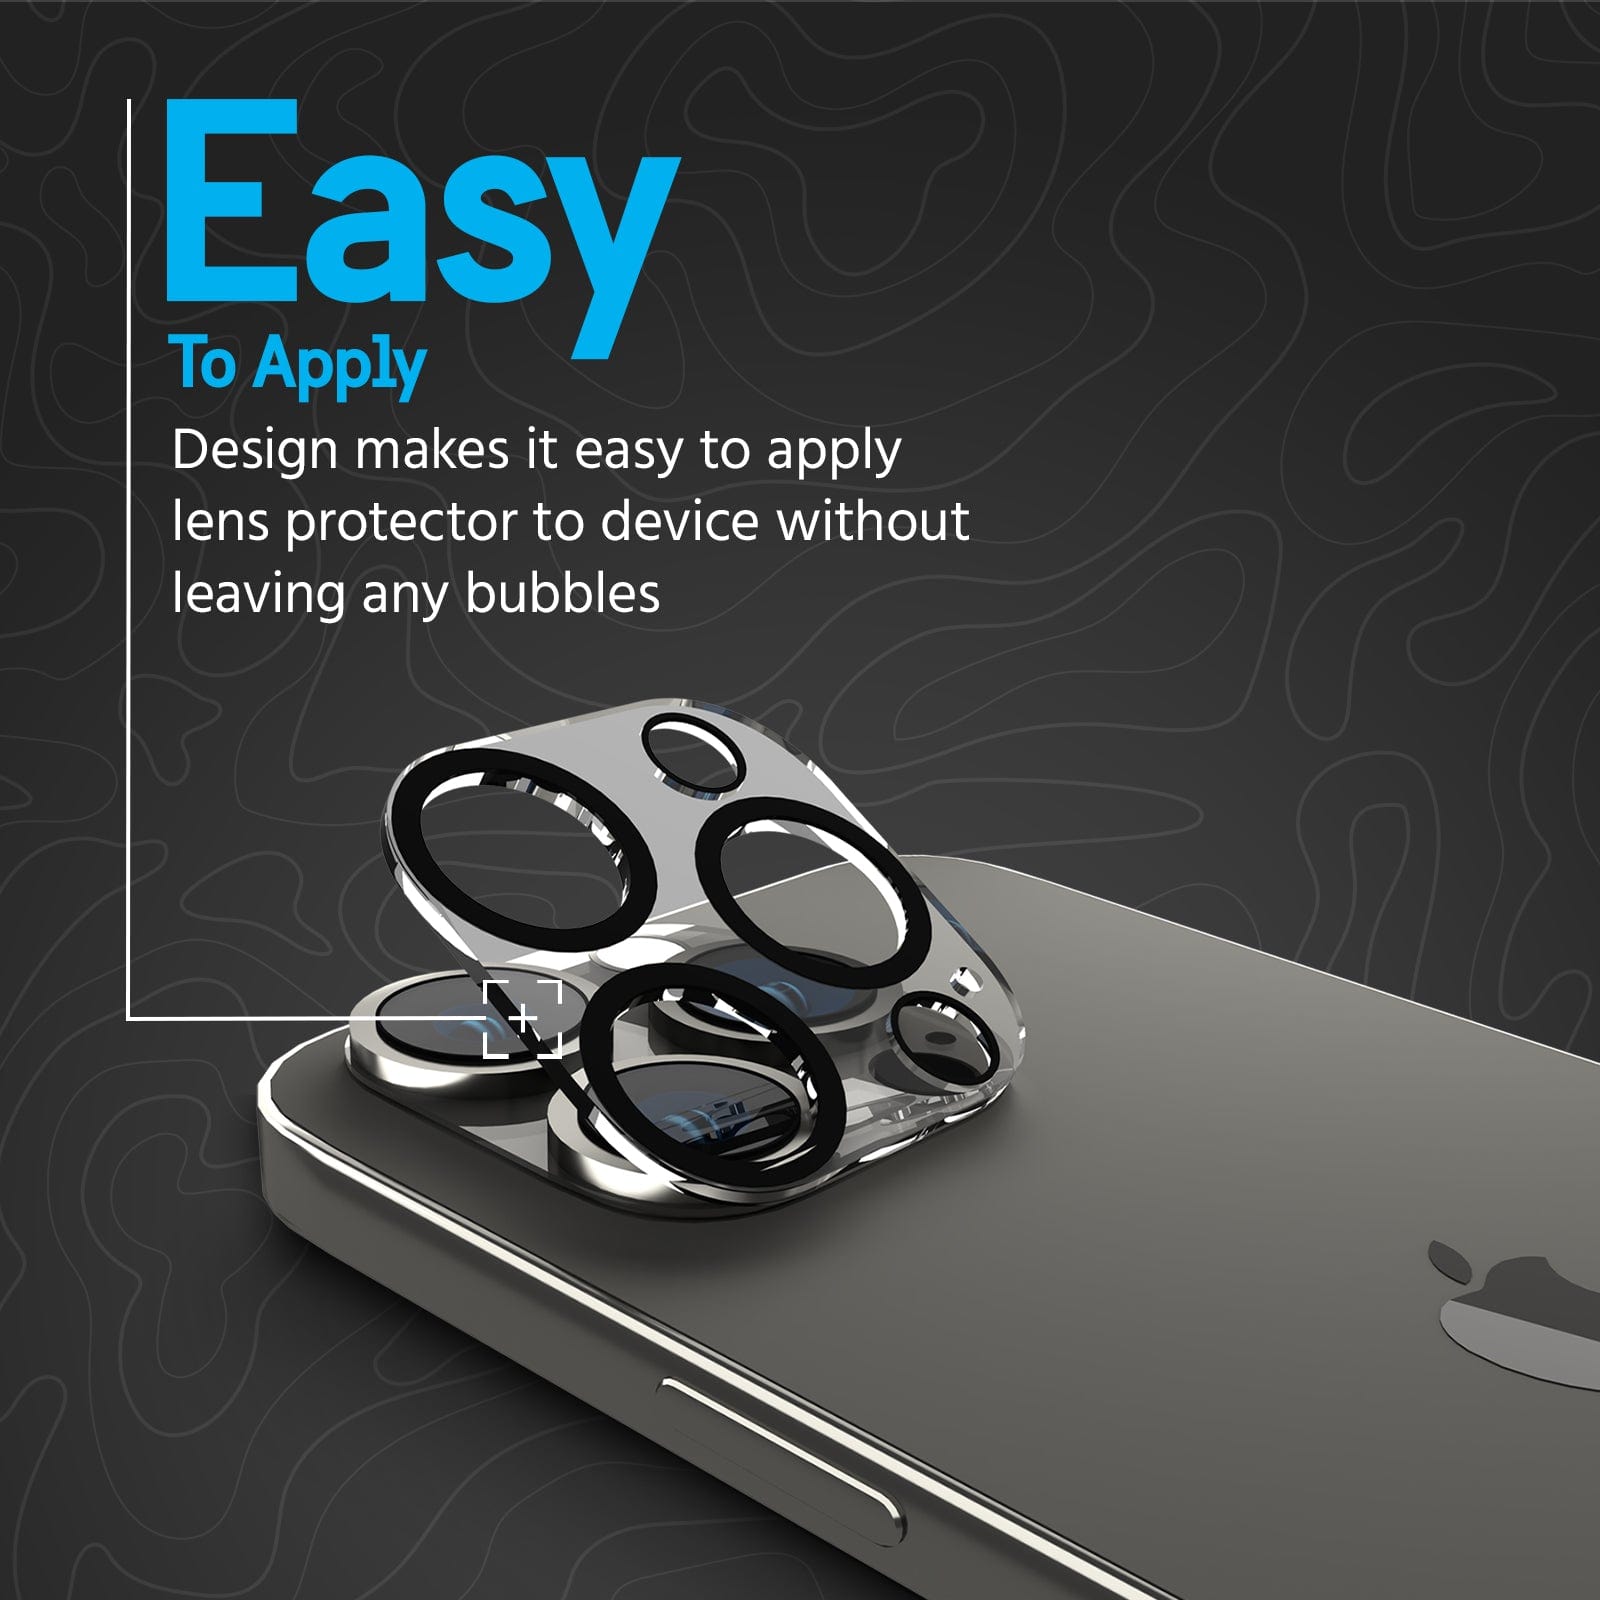 Easy to apply. Design makes it easy to apply lens protector to device without leaving any bubbles.